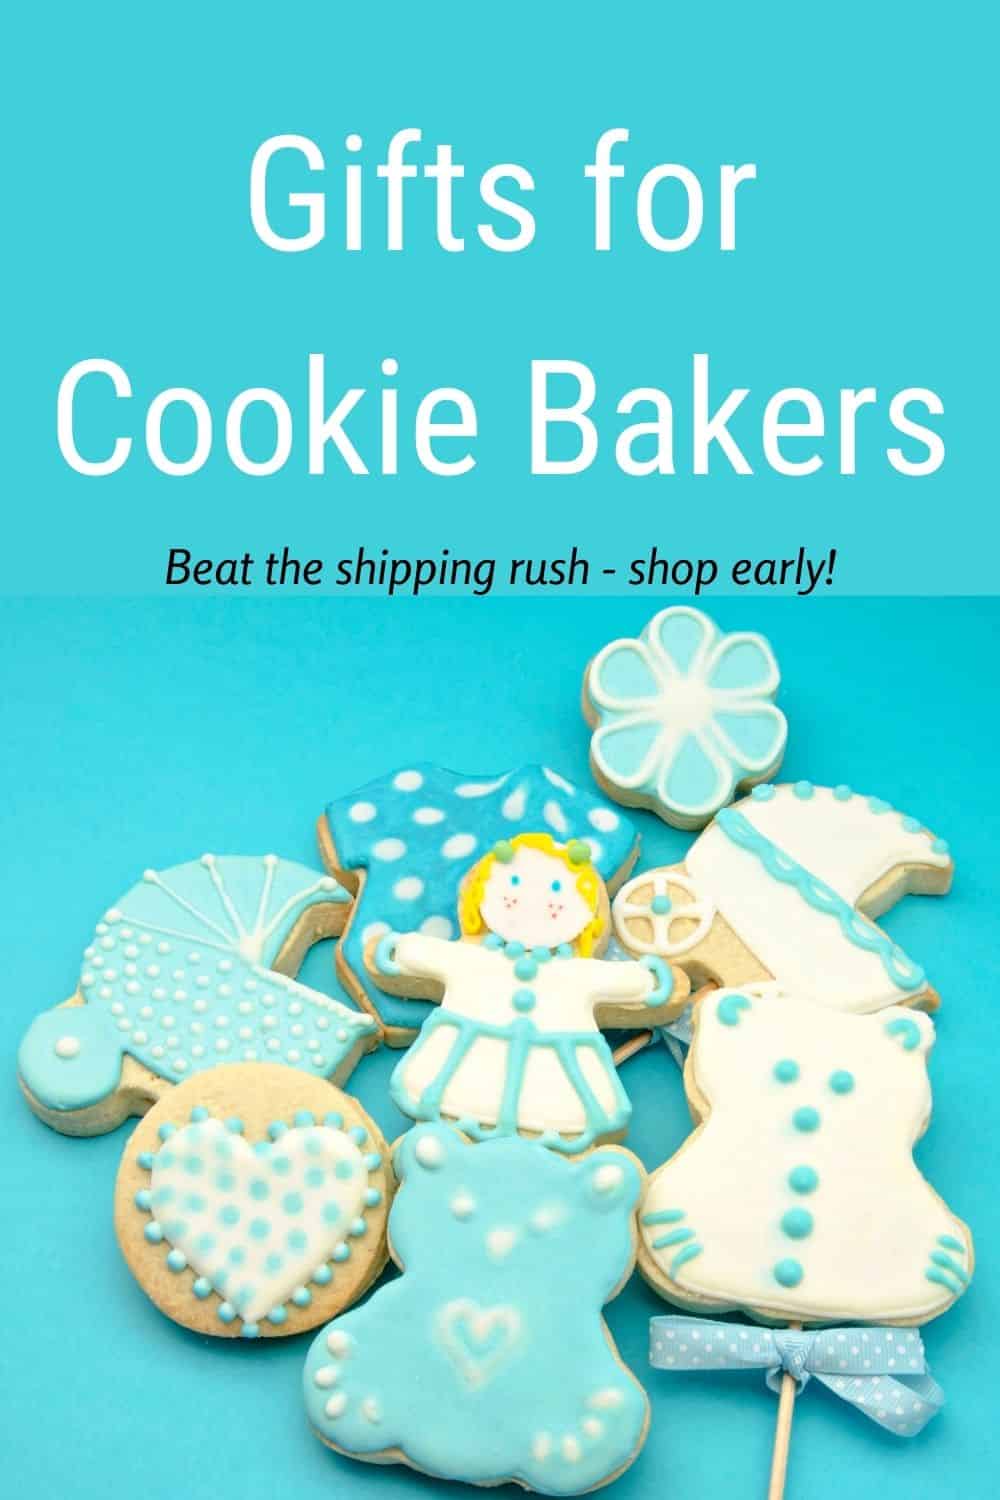 Gifts for Cookie Bakers